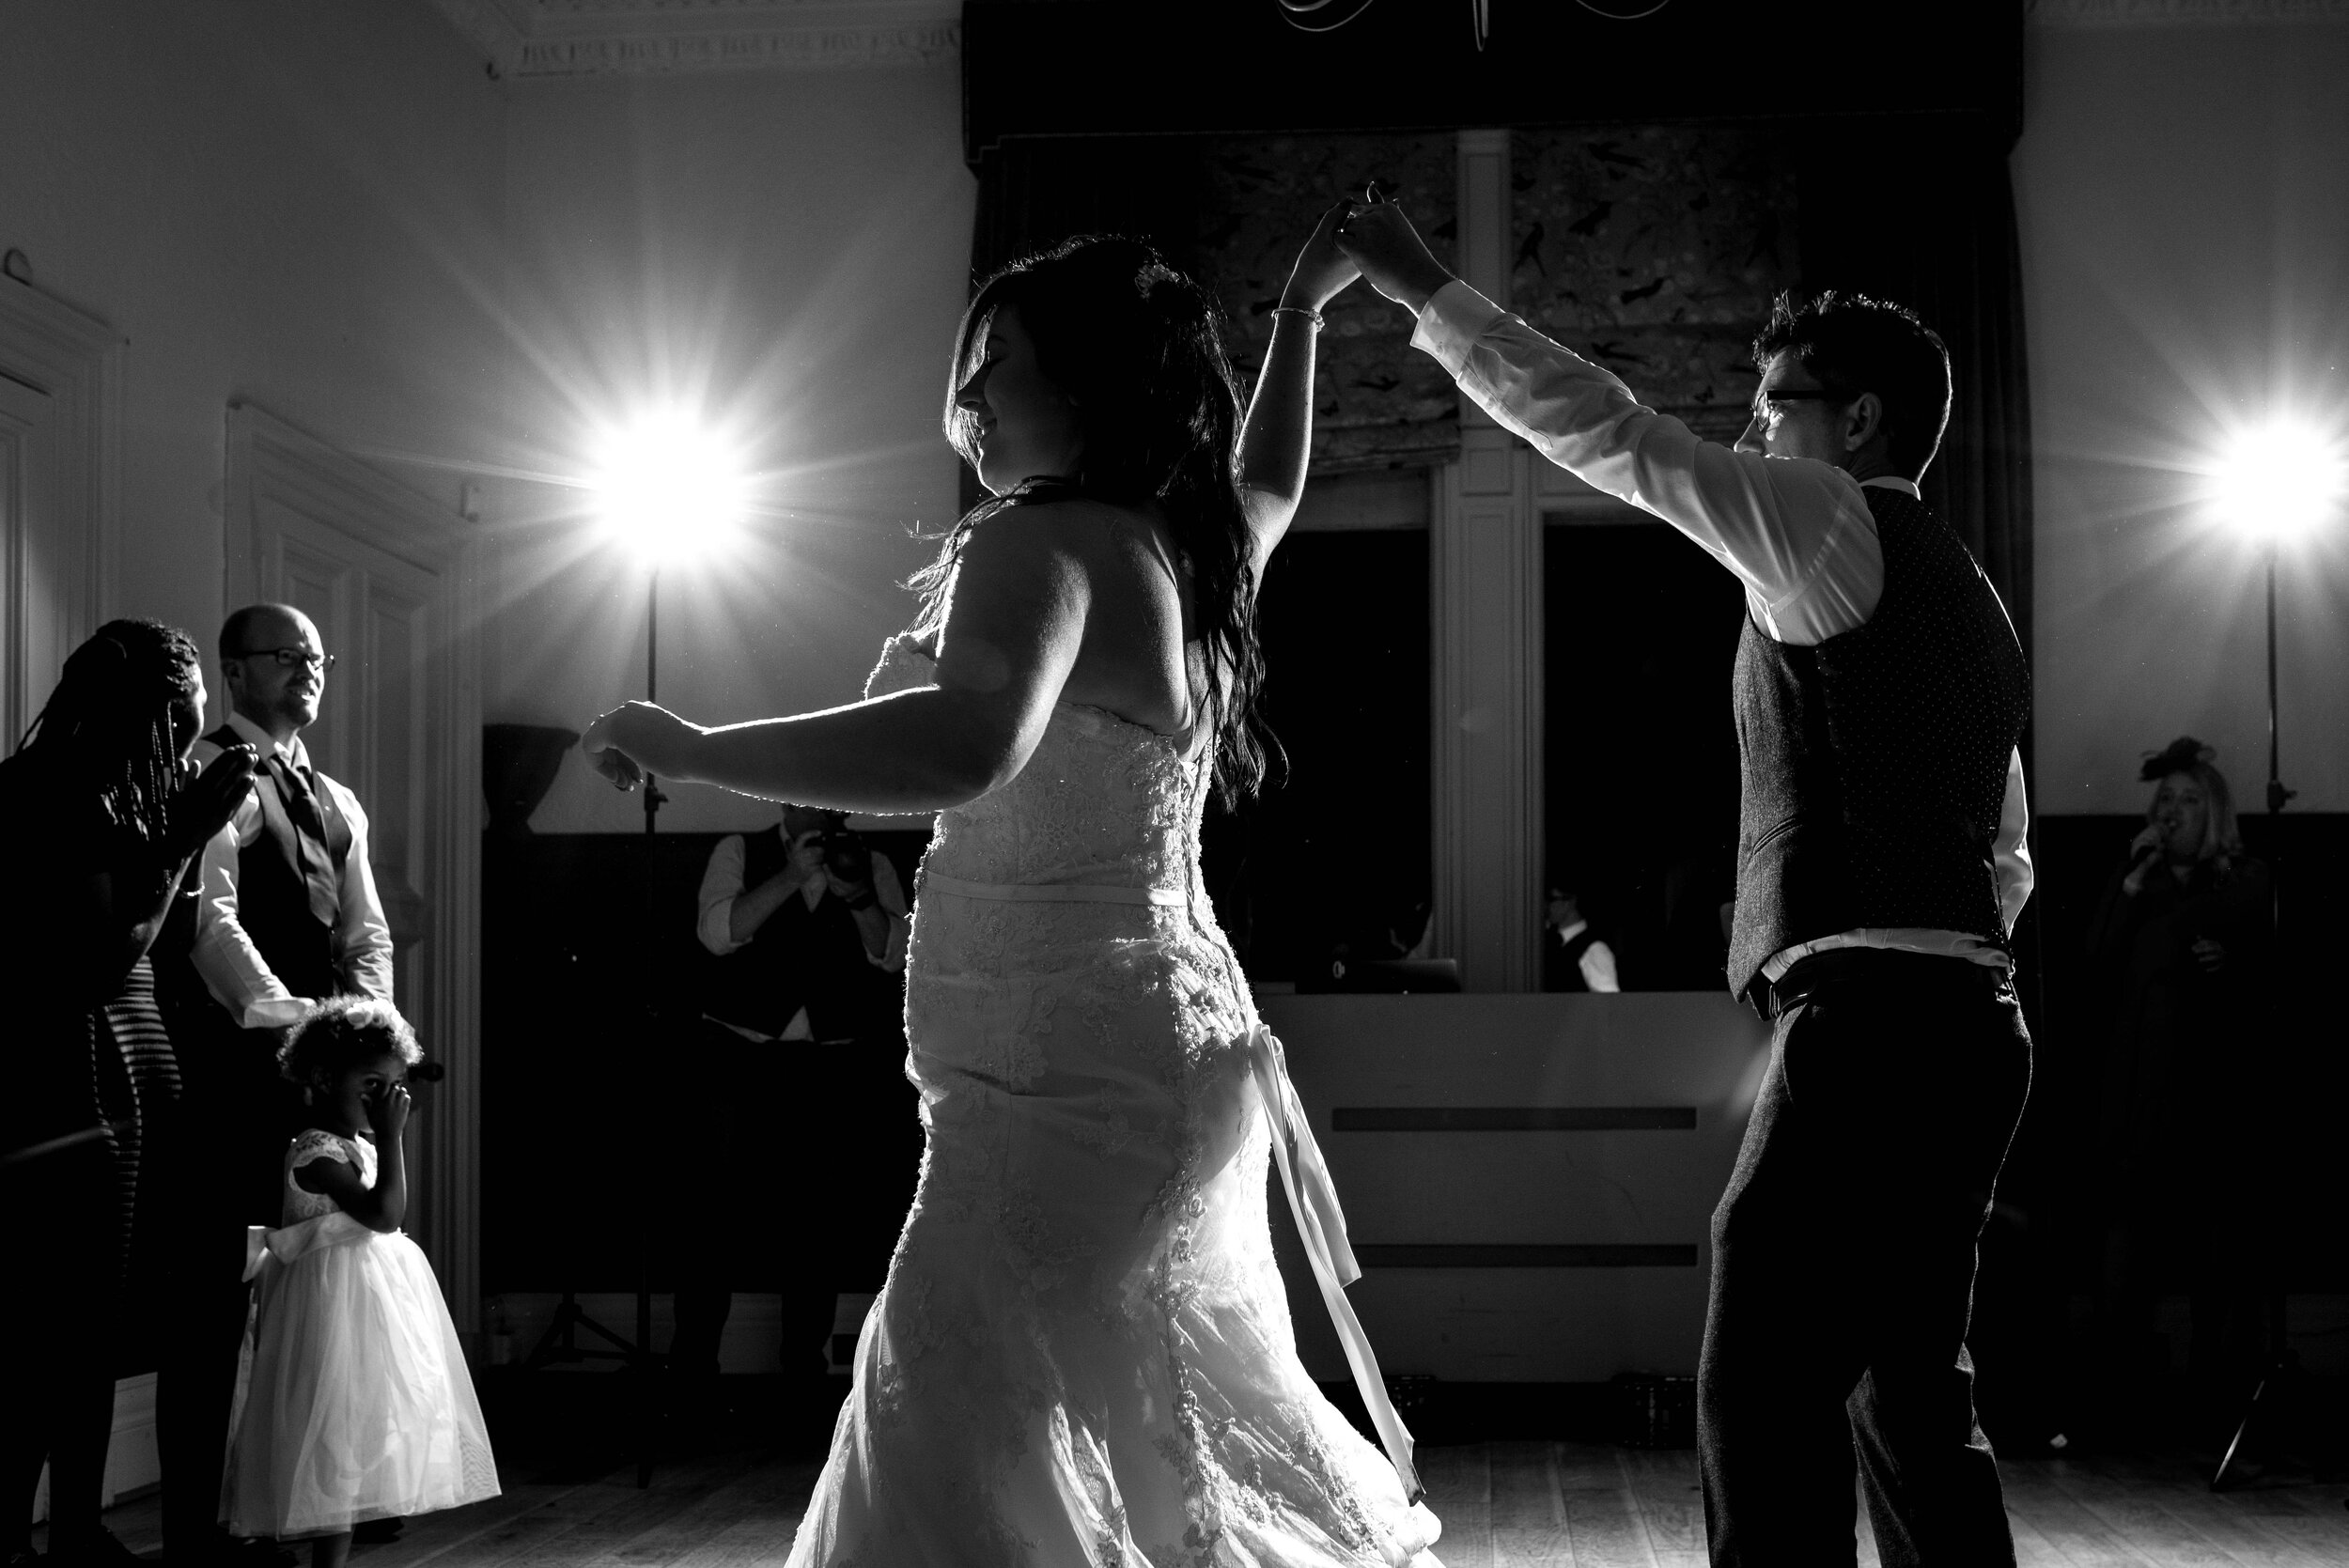 The first dance in black and white